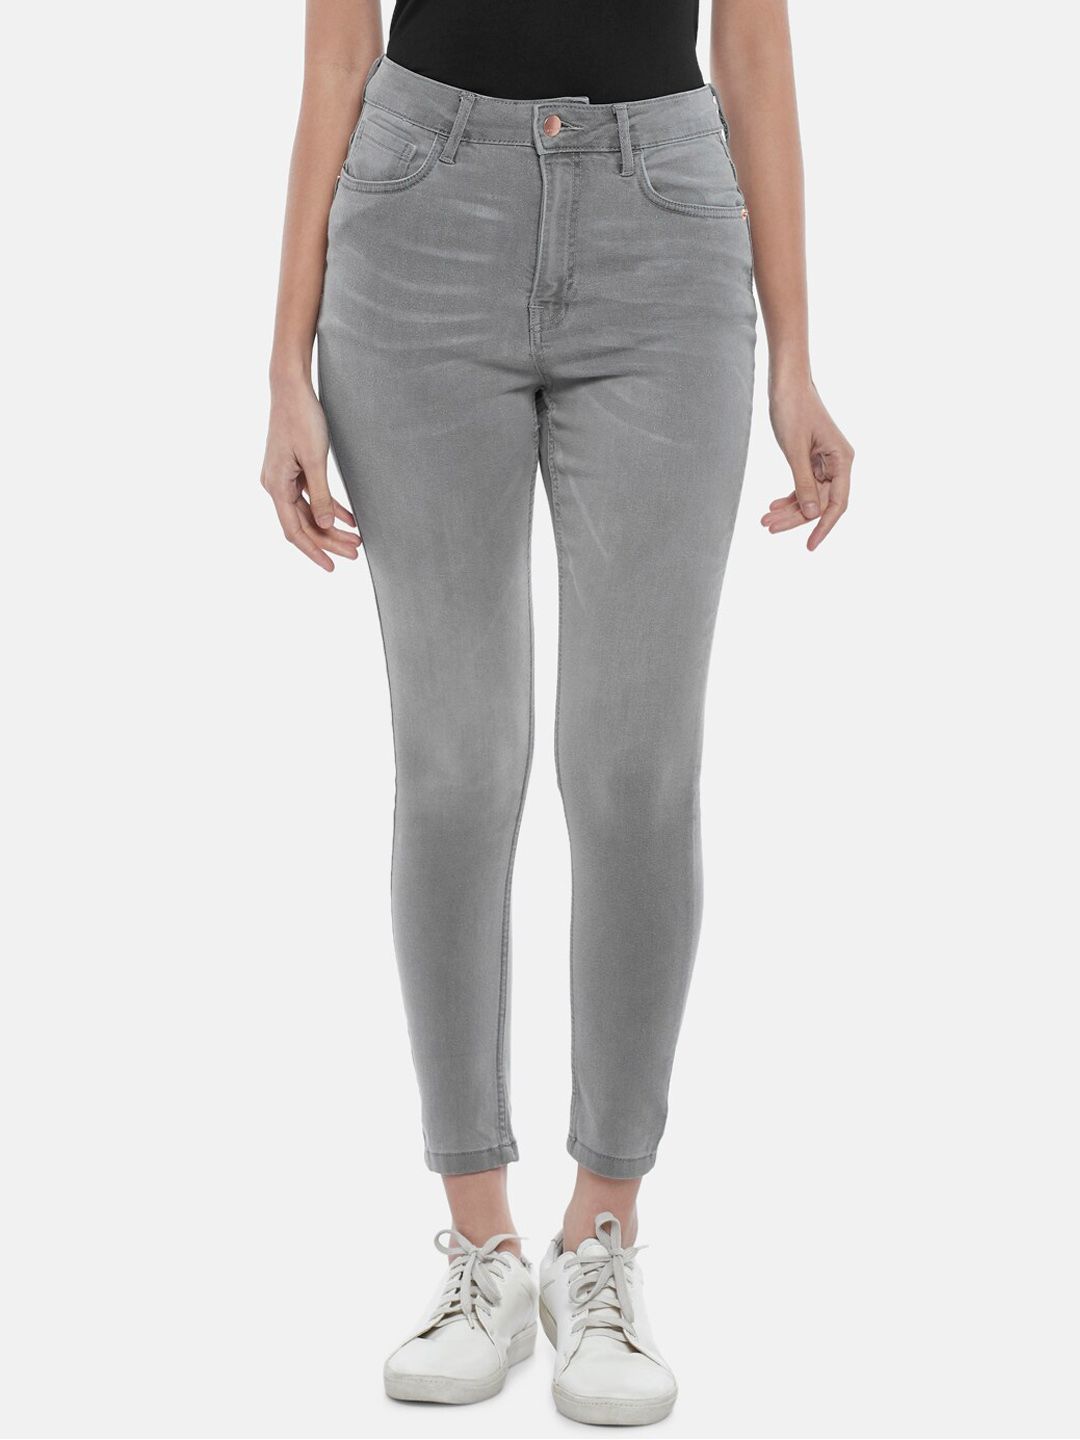 SF JEANS by Pantaloons Women Grey Skinny Fit High-Rise Jeans Price in India